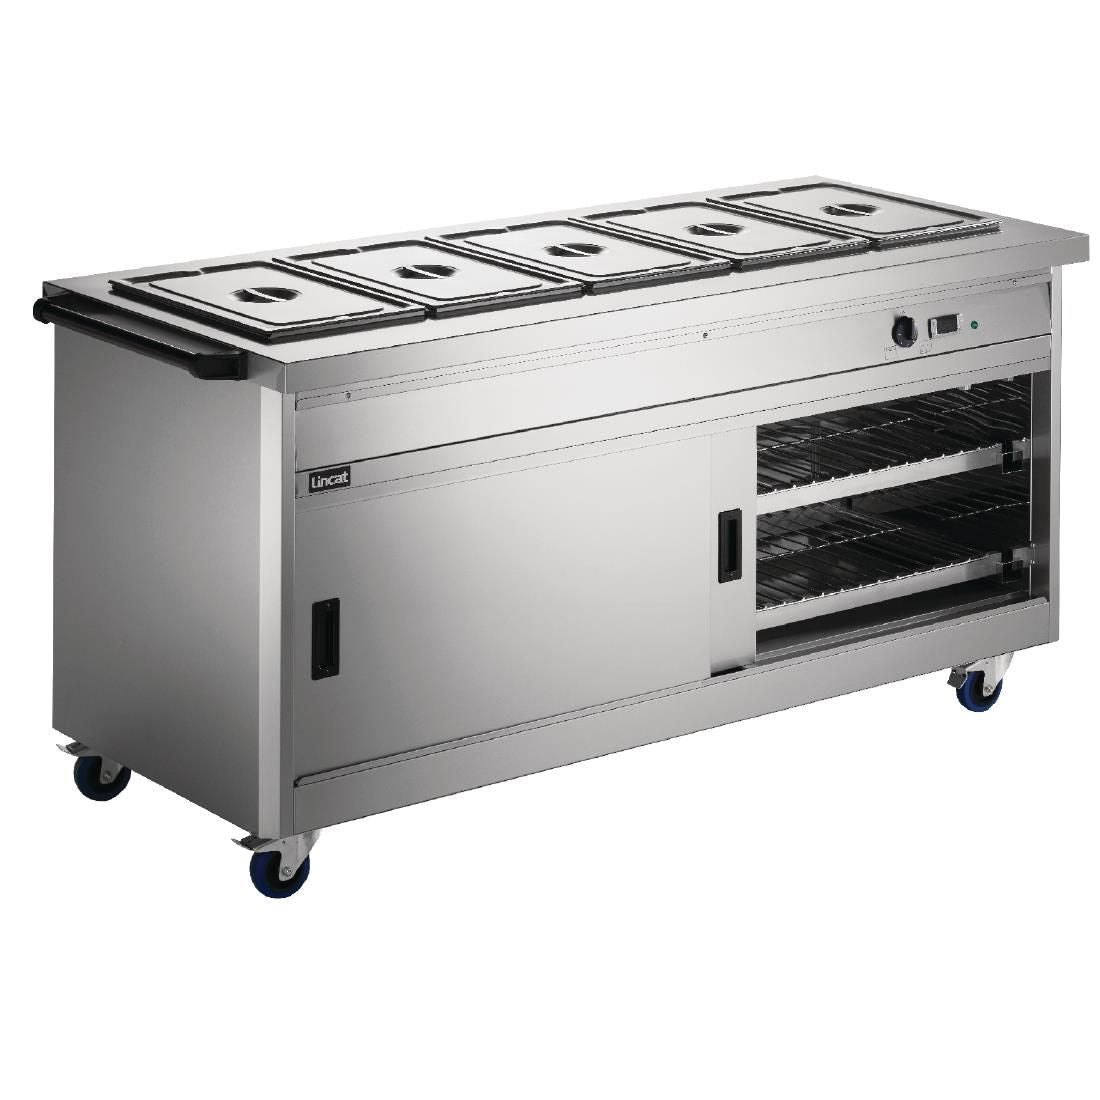 GF372 Lincat Panther Hot Cupboard and Bain Marie Top P8B5 JD Catering Equipment Solutions Ltd